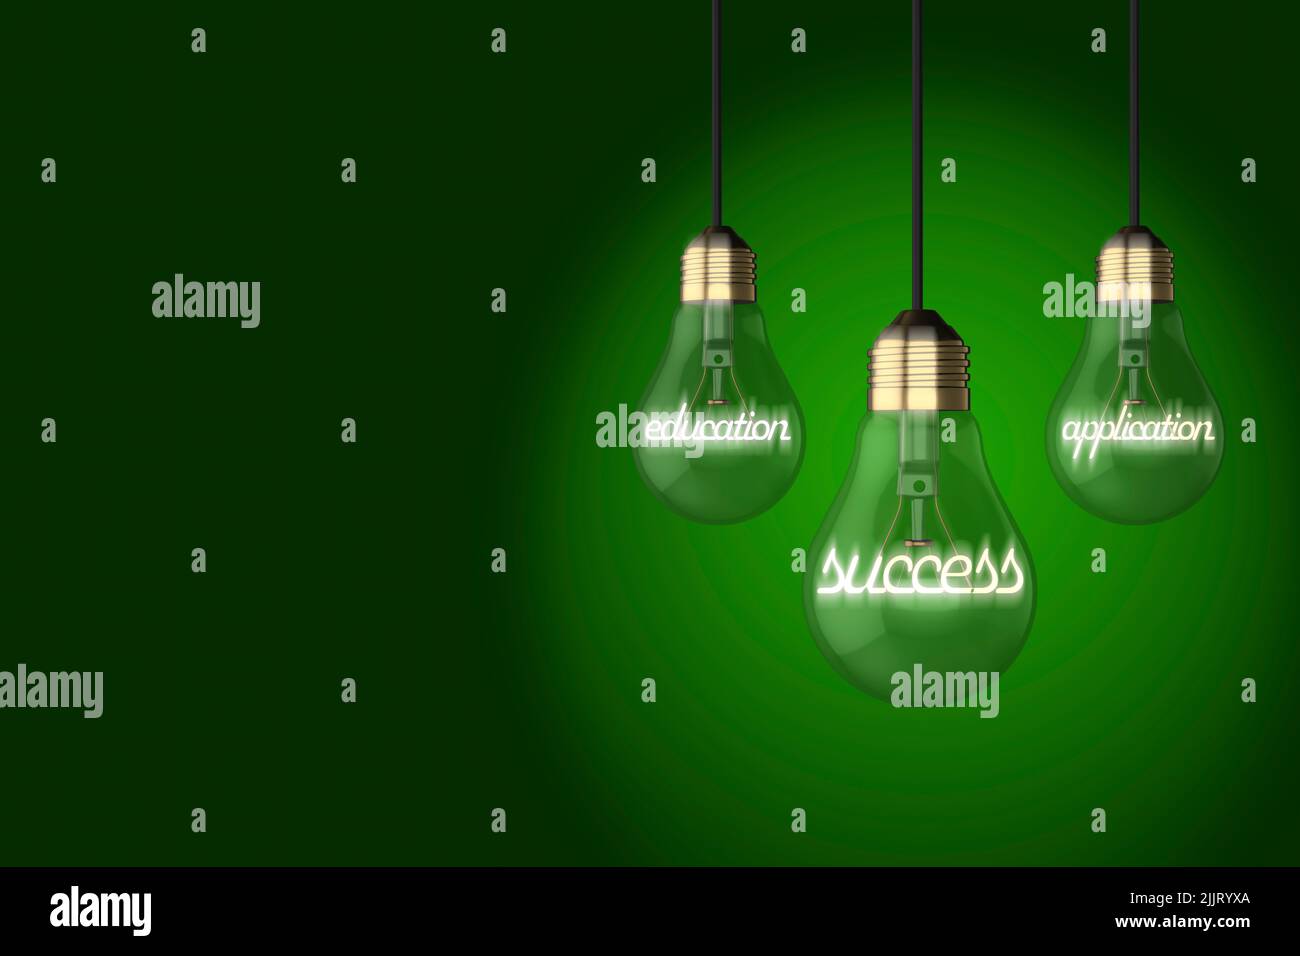 Education concept old style light bulb light bulbs education application success concept glowing text on a green background Stock Photo